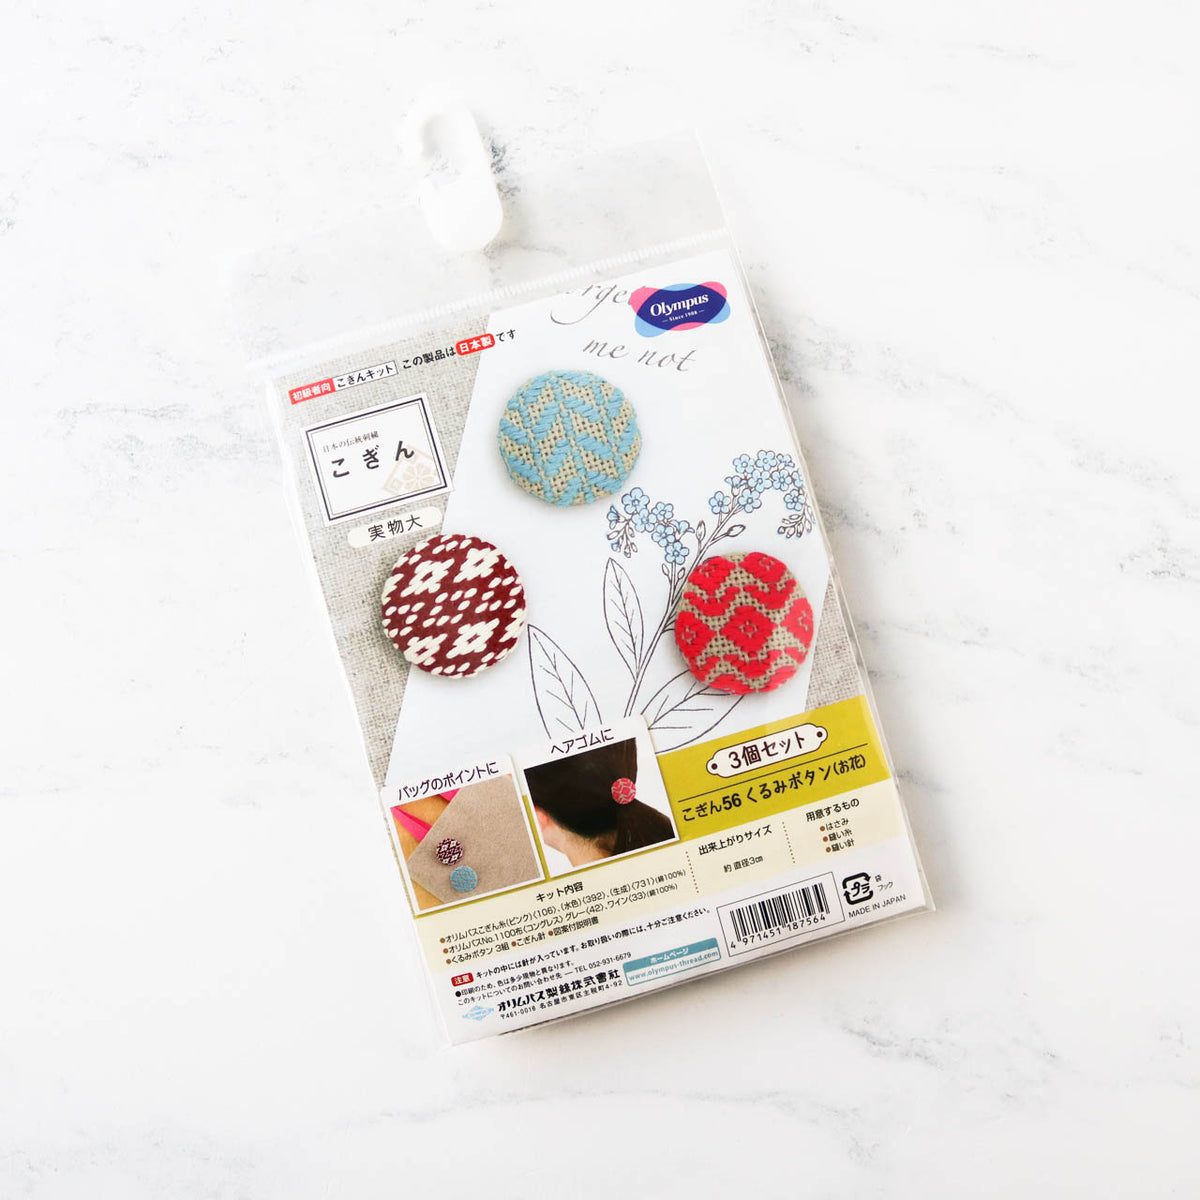 Kogin Embroidery Covered Button Kit - Geometric Set 1